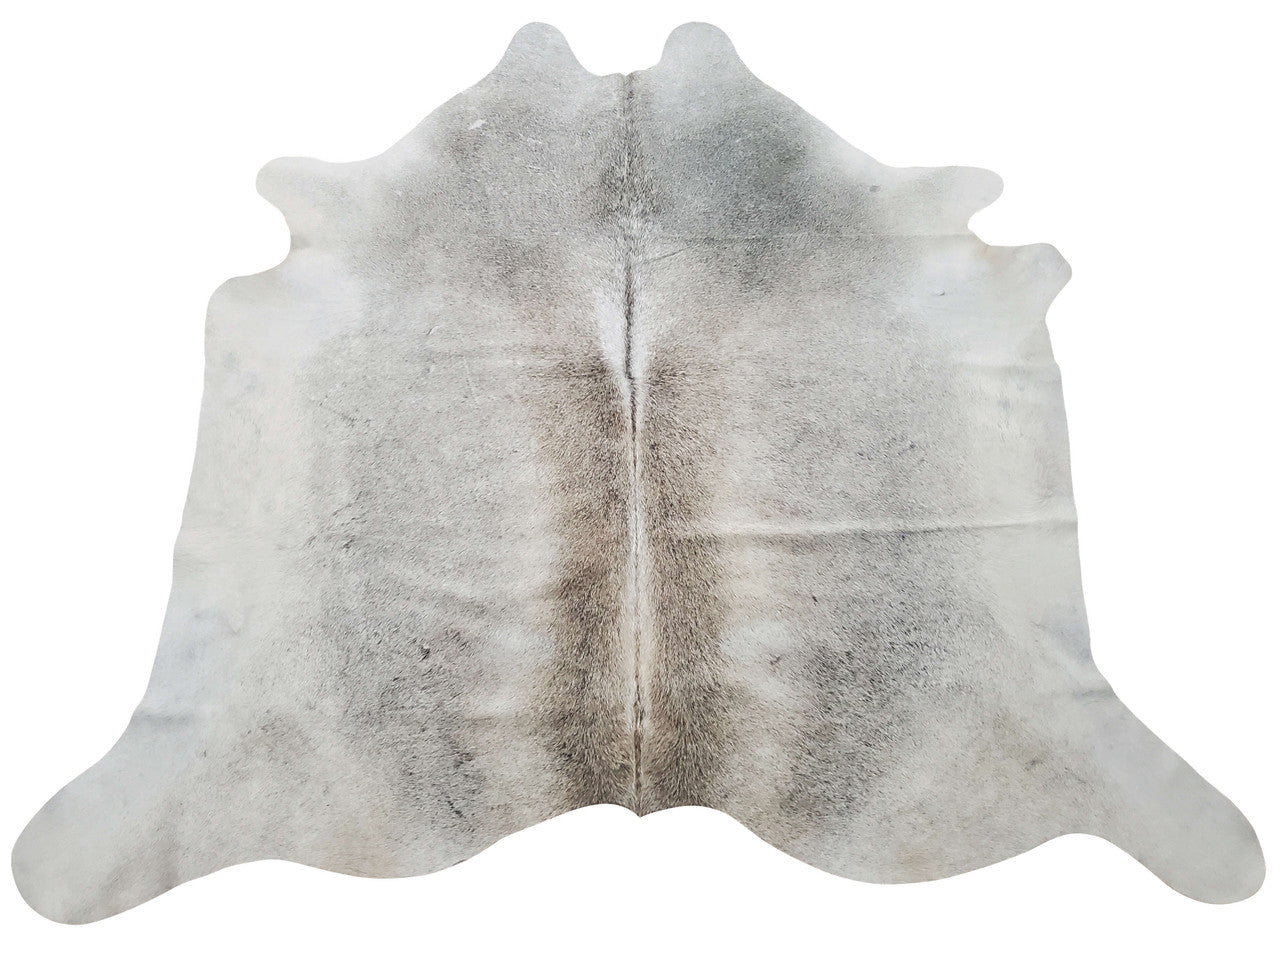 This grey cowhide rug feels like your walking on clouds! It’s so soft and so beautiful, free shipping all over Canada and its totally natural and real. 